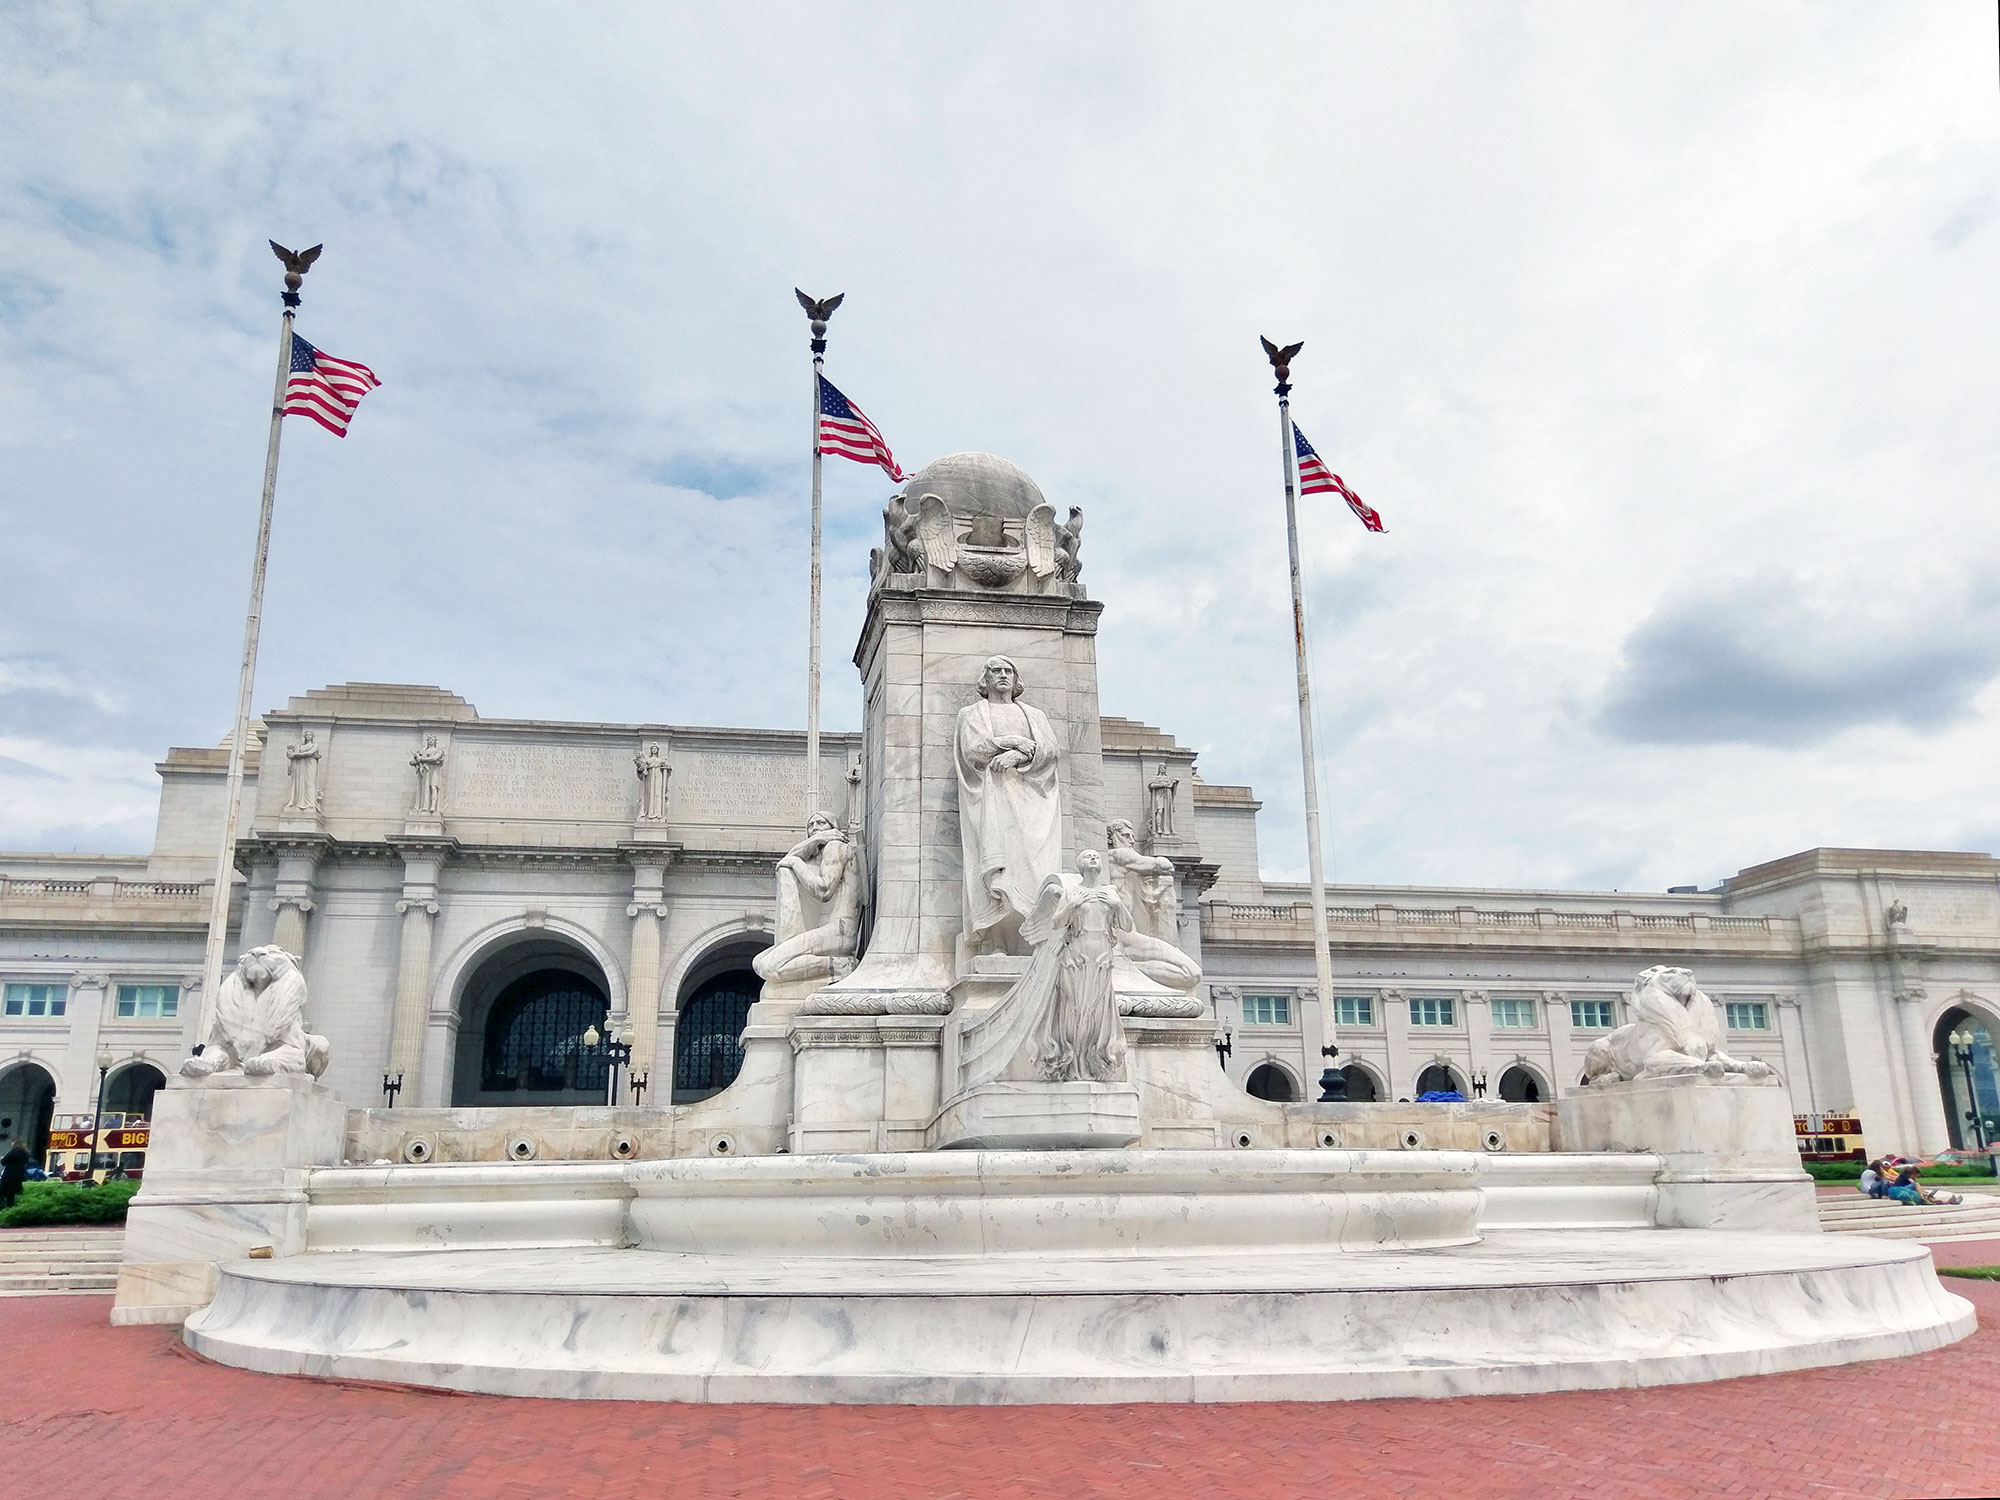 The front of Union Station in Washington D.C.